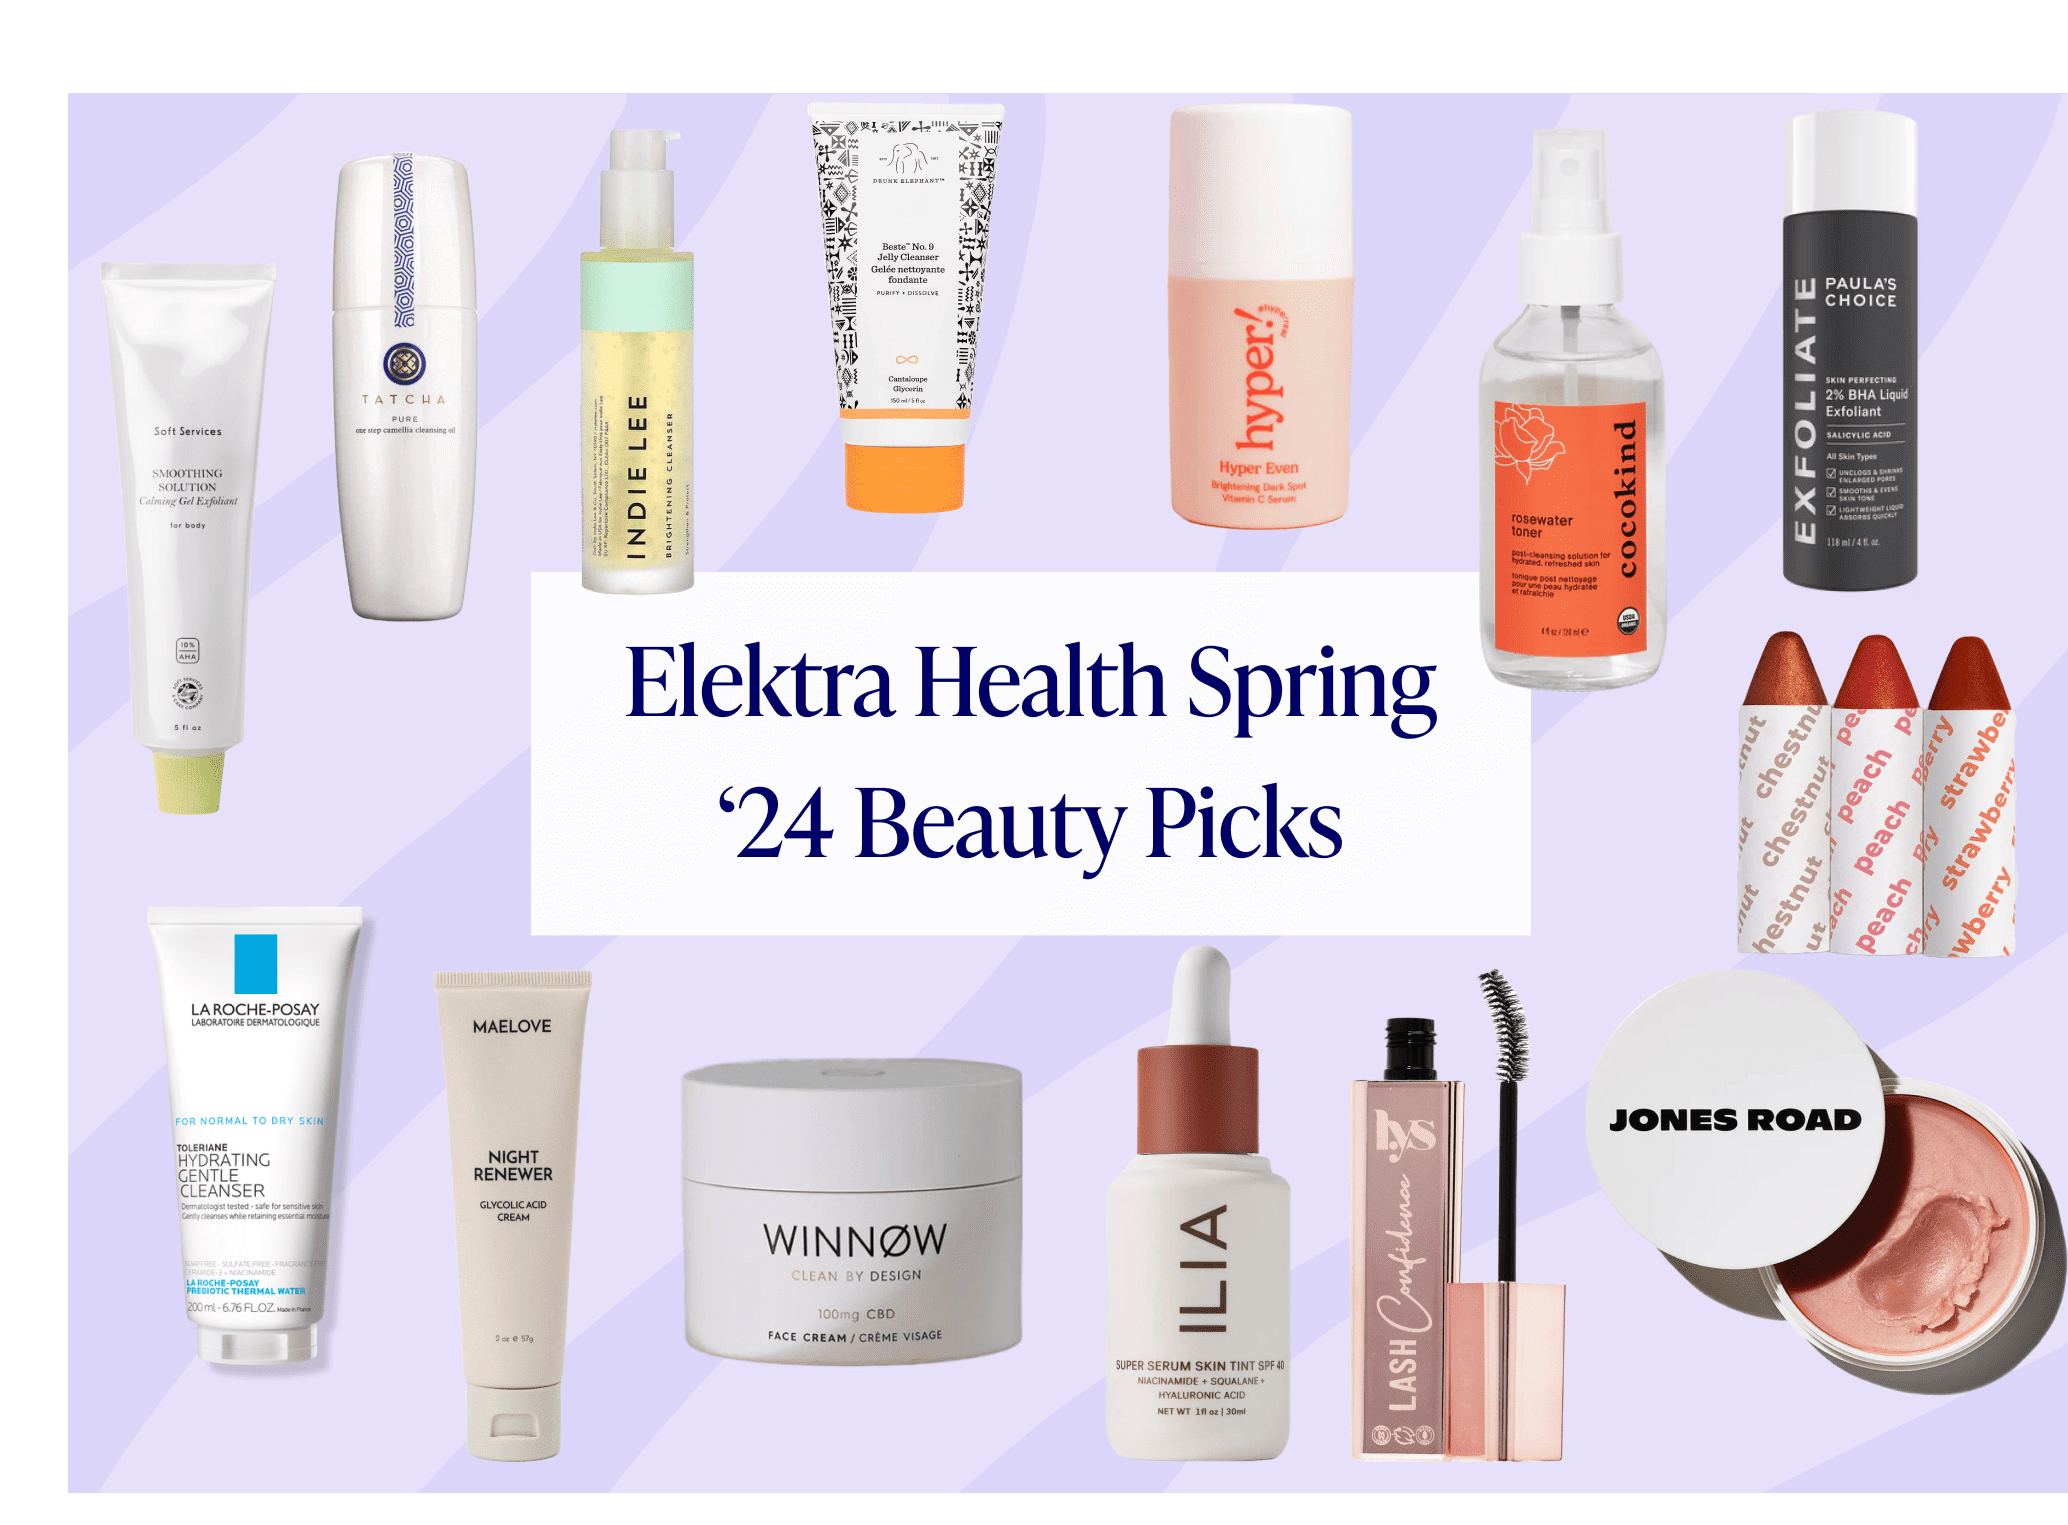 14 Clean Skincare and Beauty Products We’re Loving This Spring